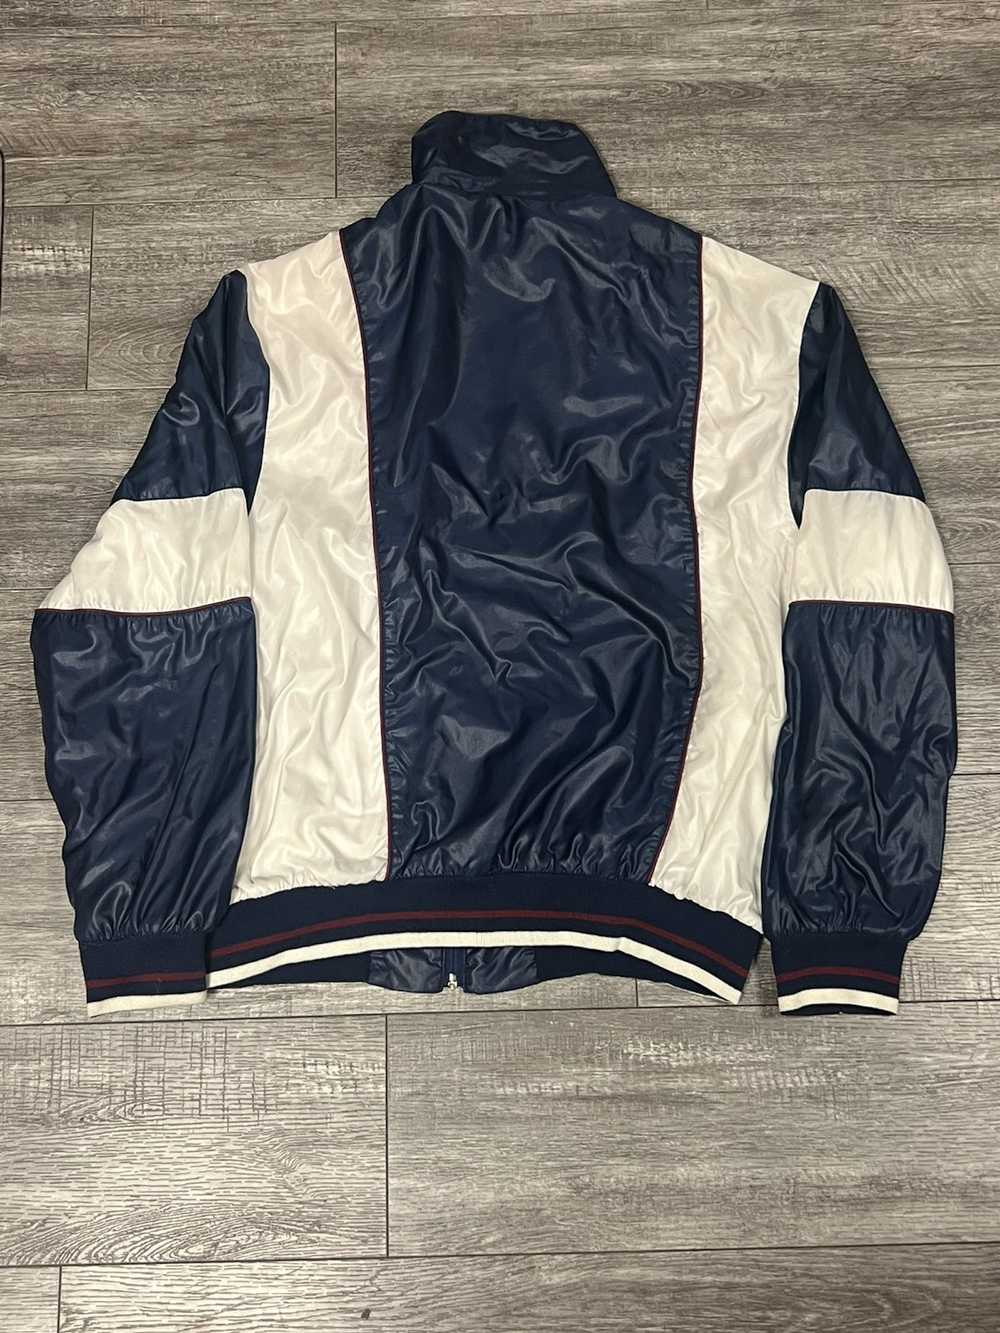 Fred Perry 90s Vintage FRED PERRY Windbreaker Jac… - image 2